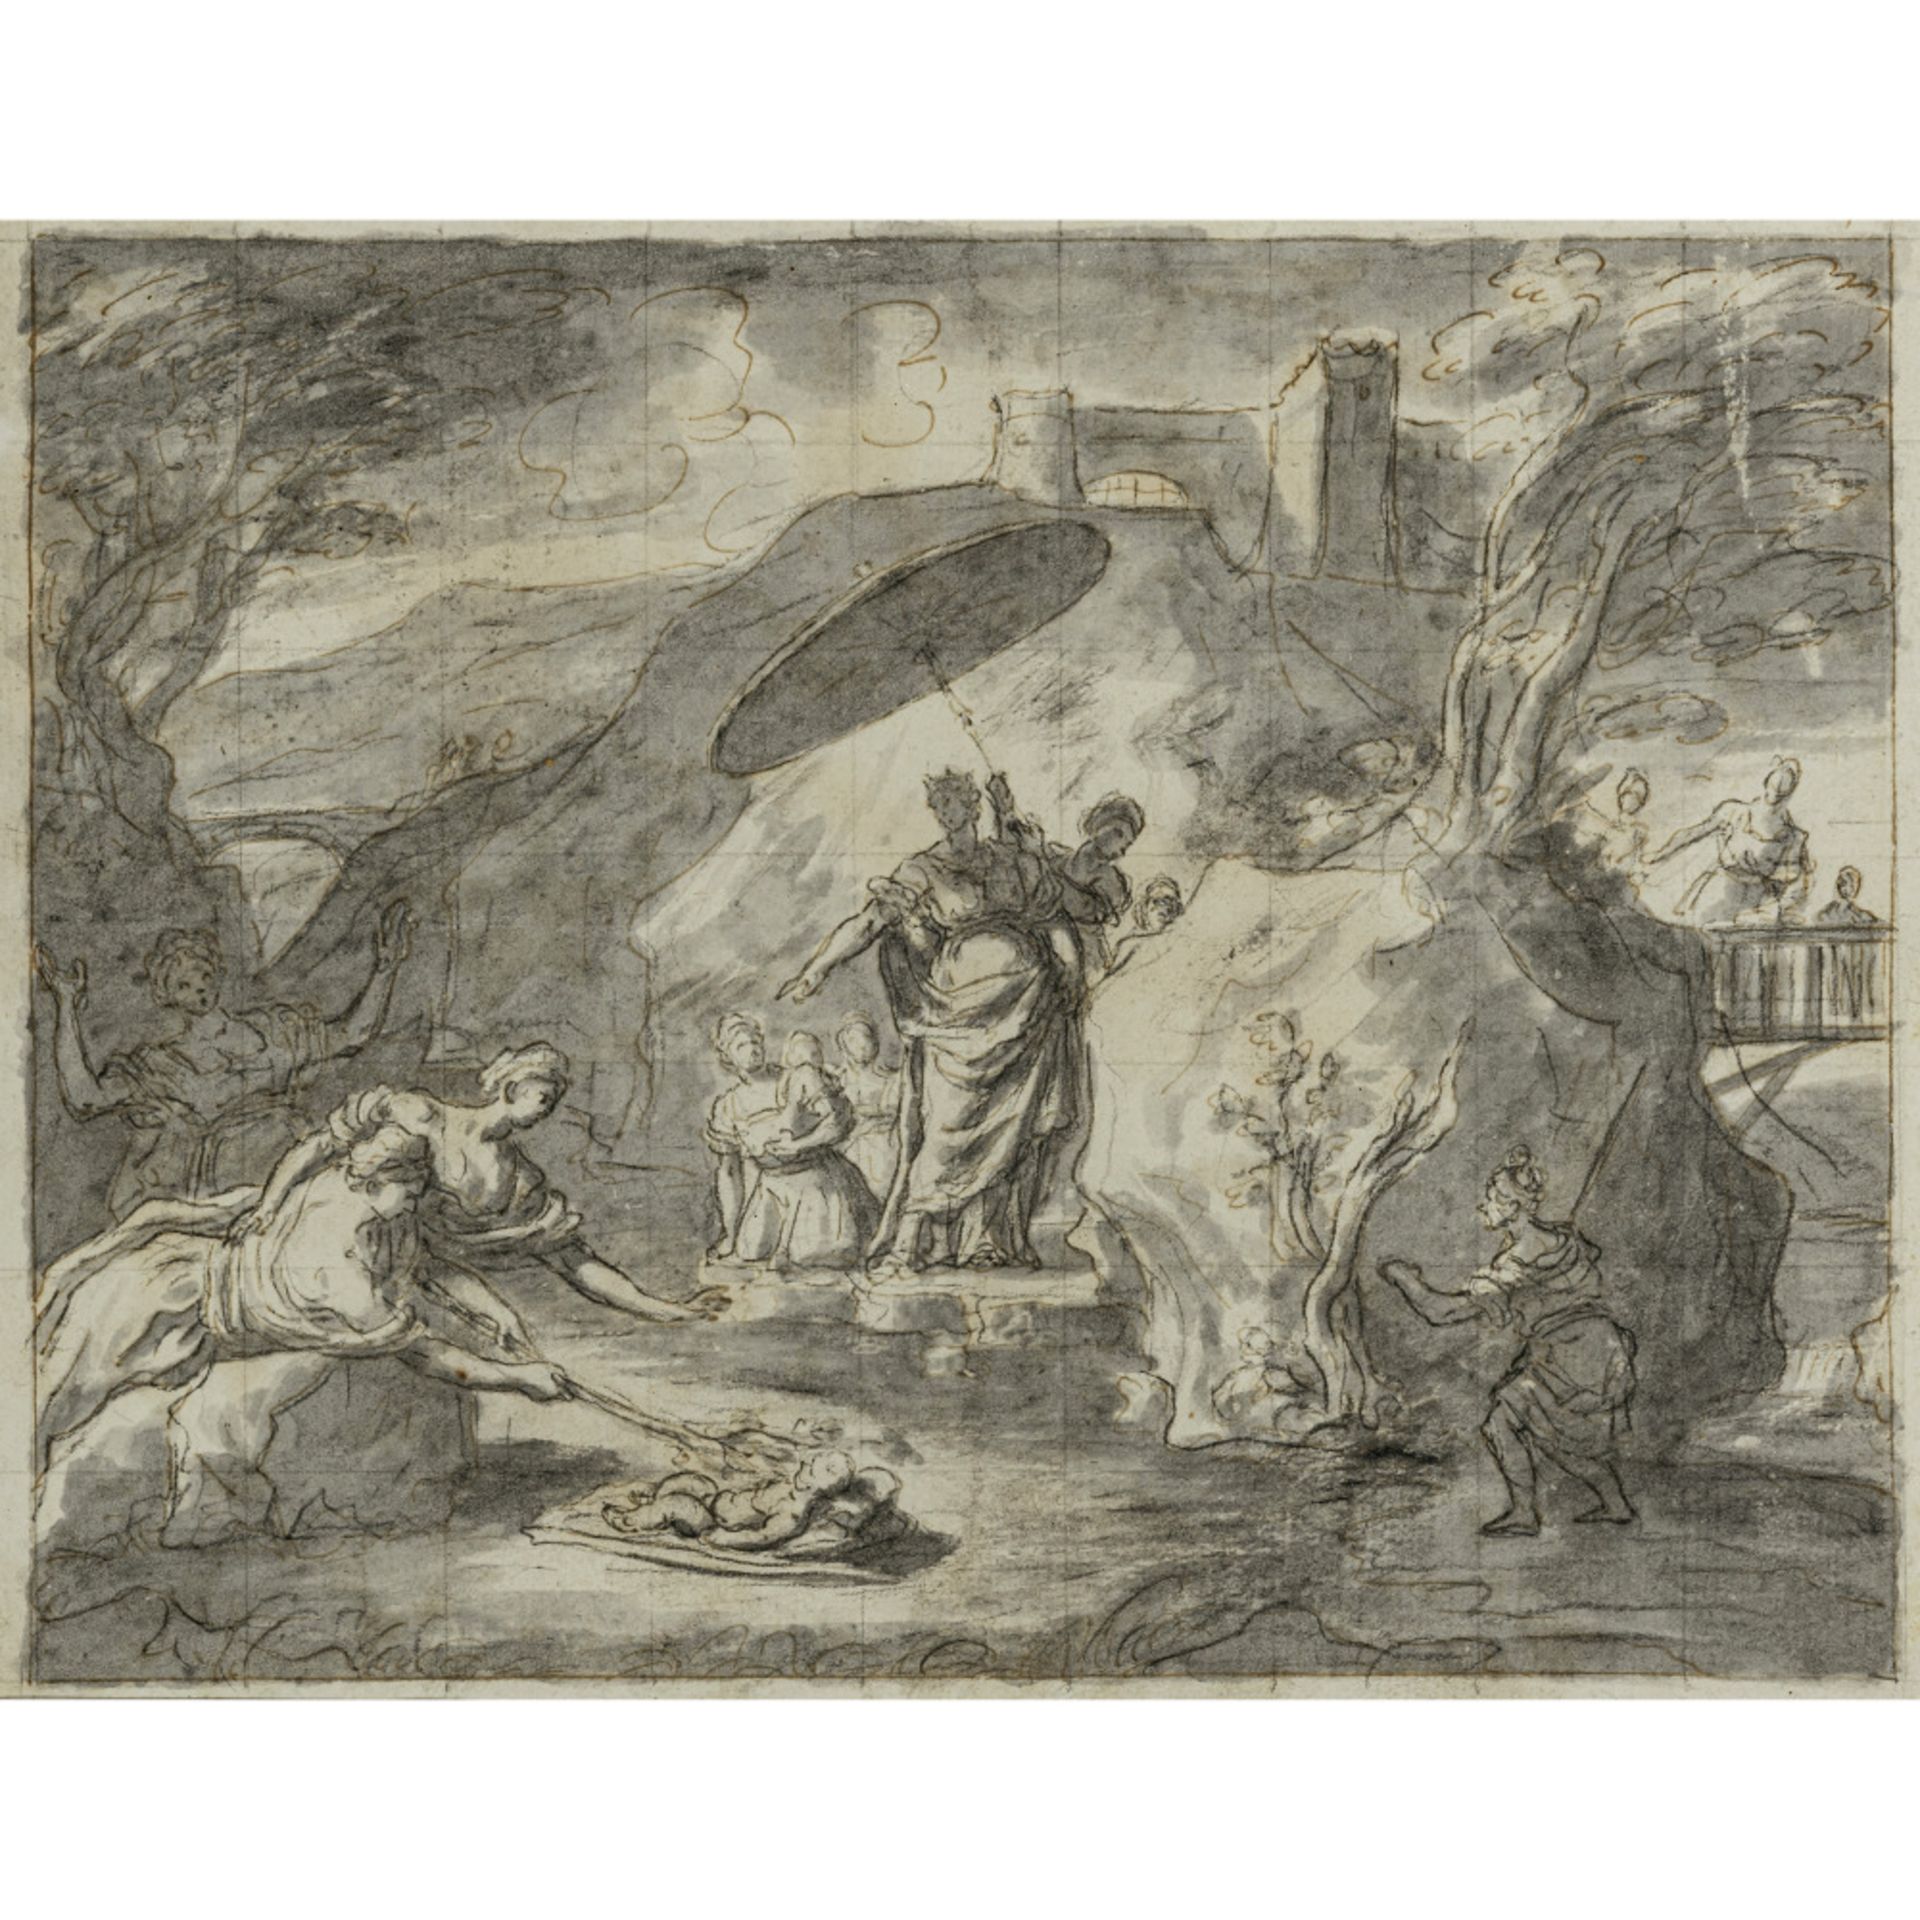 Niederlande Circa 1700 - The Finding of Moses